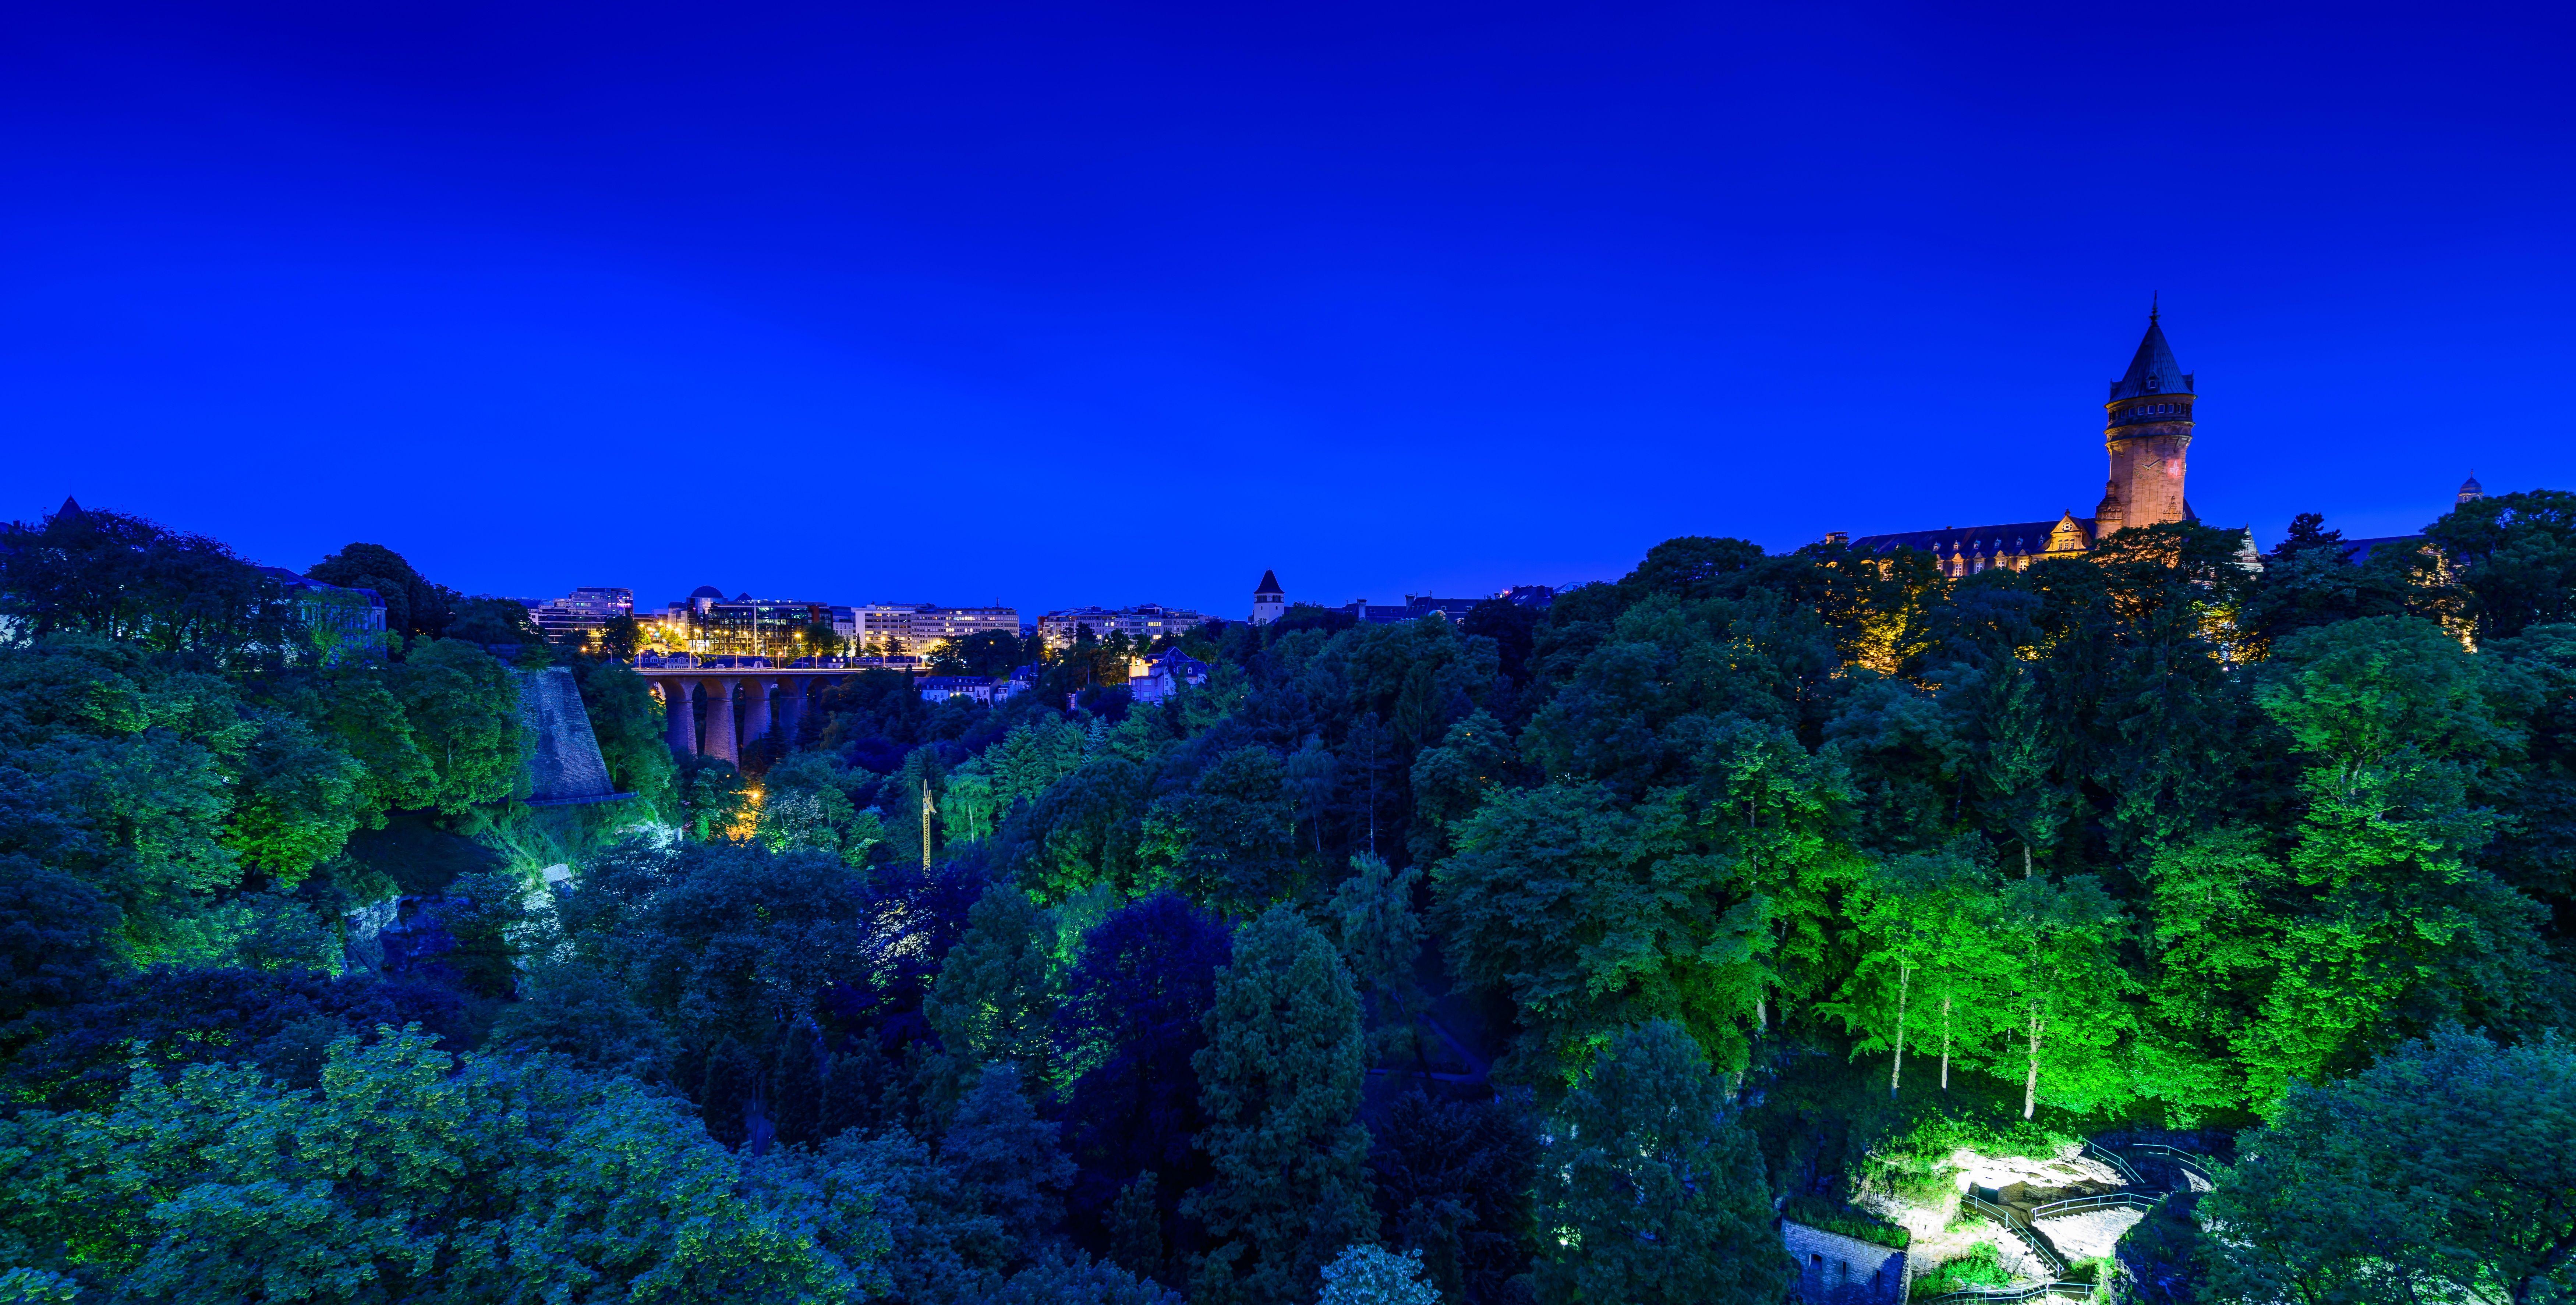 image of Luxembourg 1920x1200 Wallpaperluxembourg Wallpaper - #SC